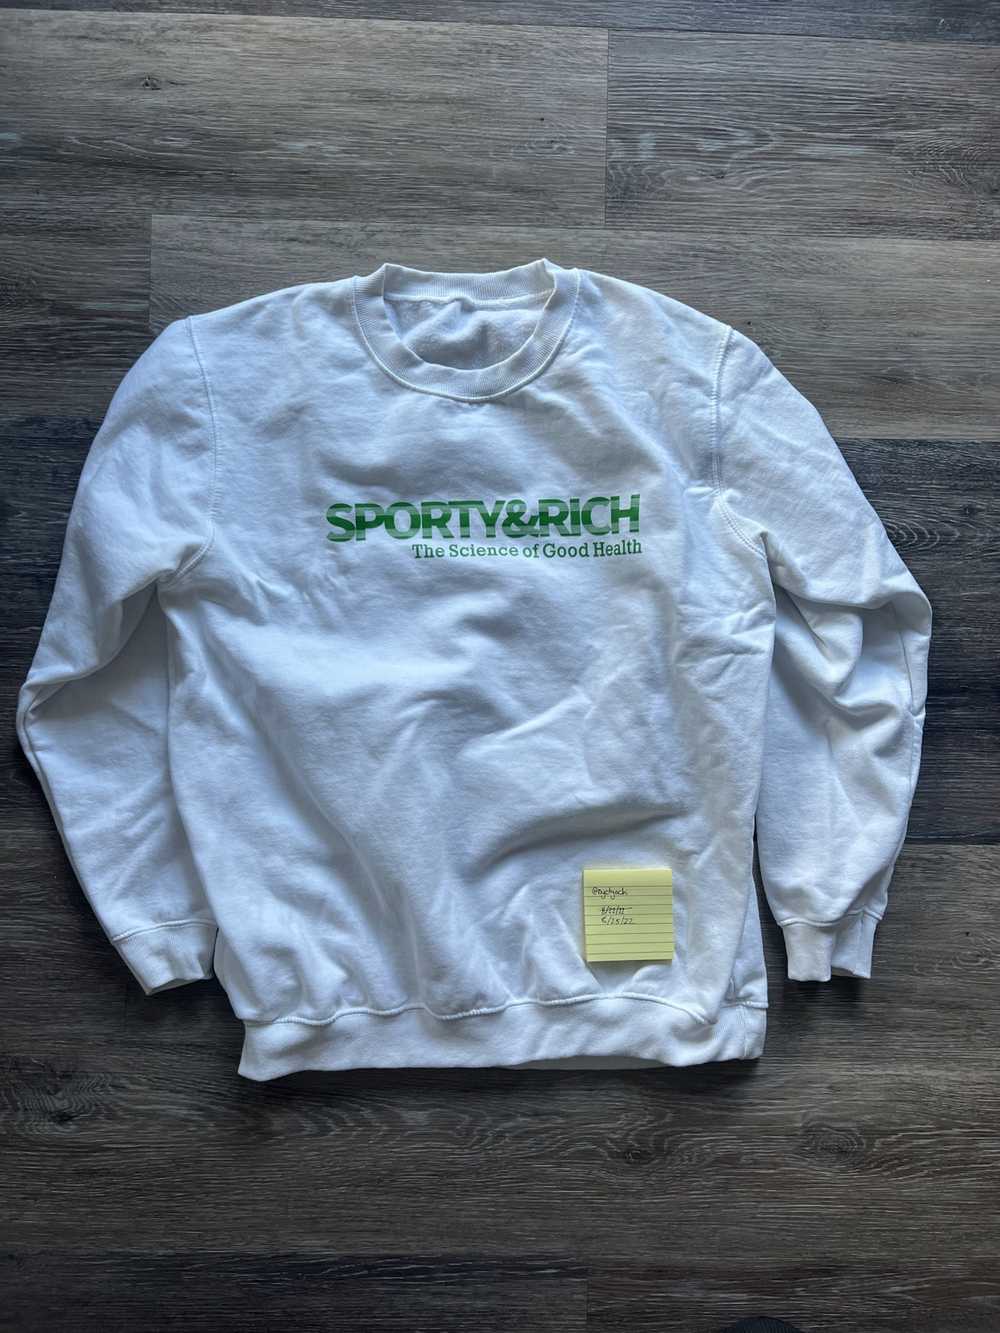 Other Sporty and Rich Crewneck - image 3